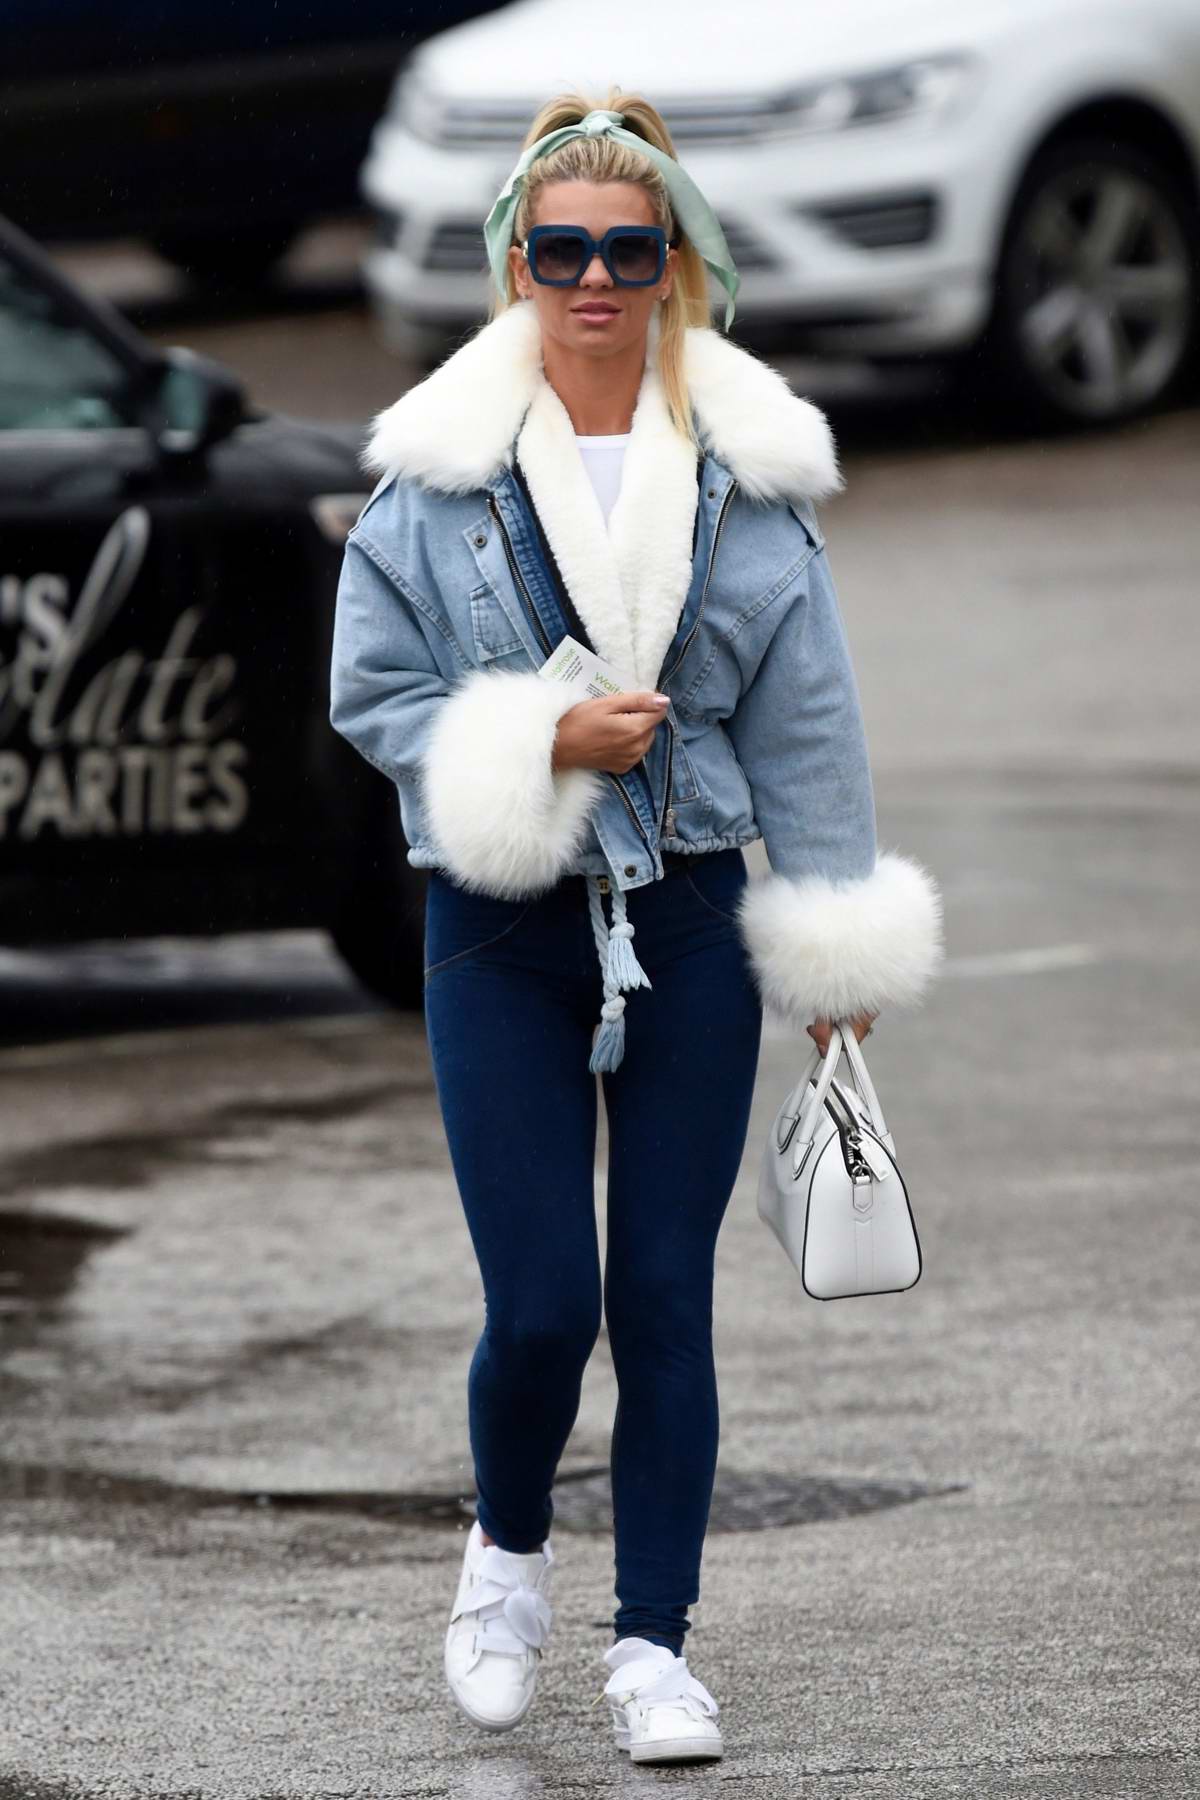 Christine McGuinness seen wearing a fur-lined denim jacket and